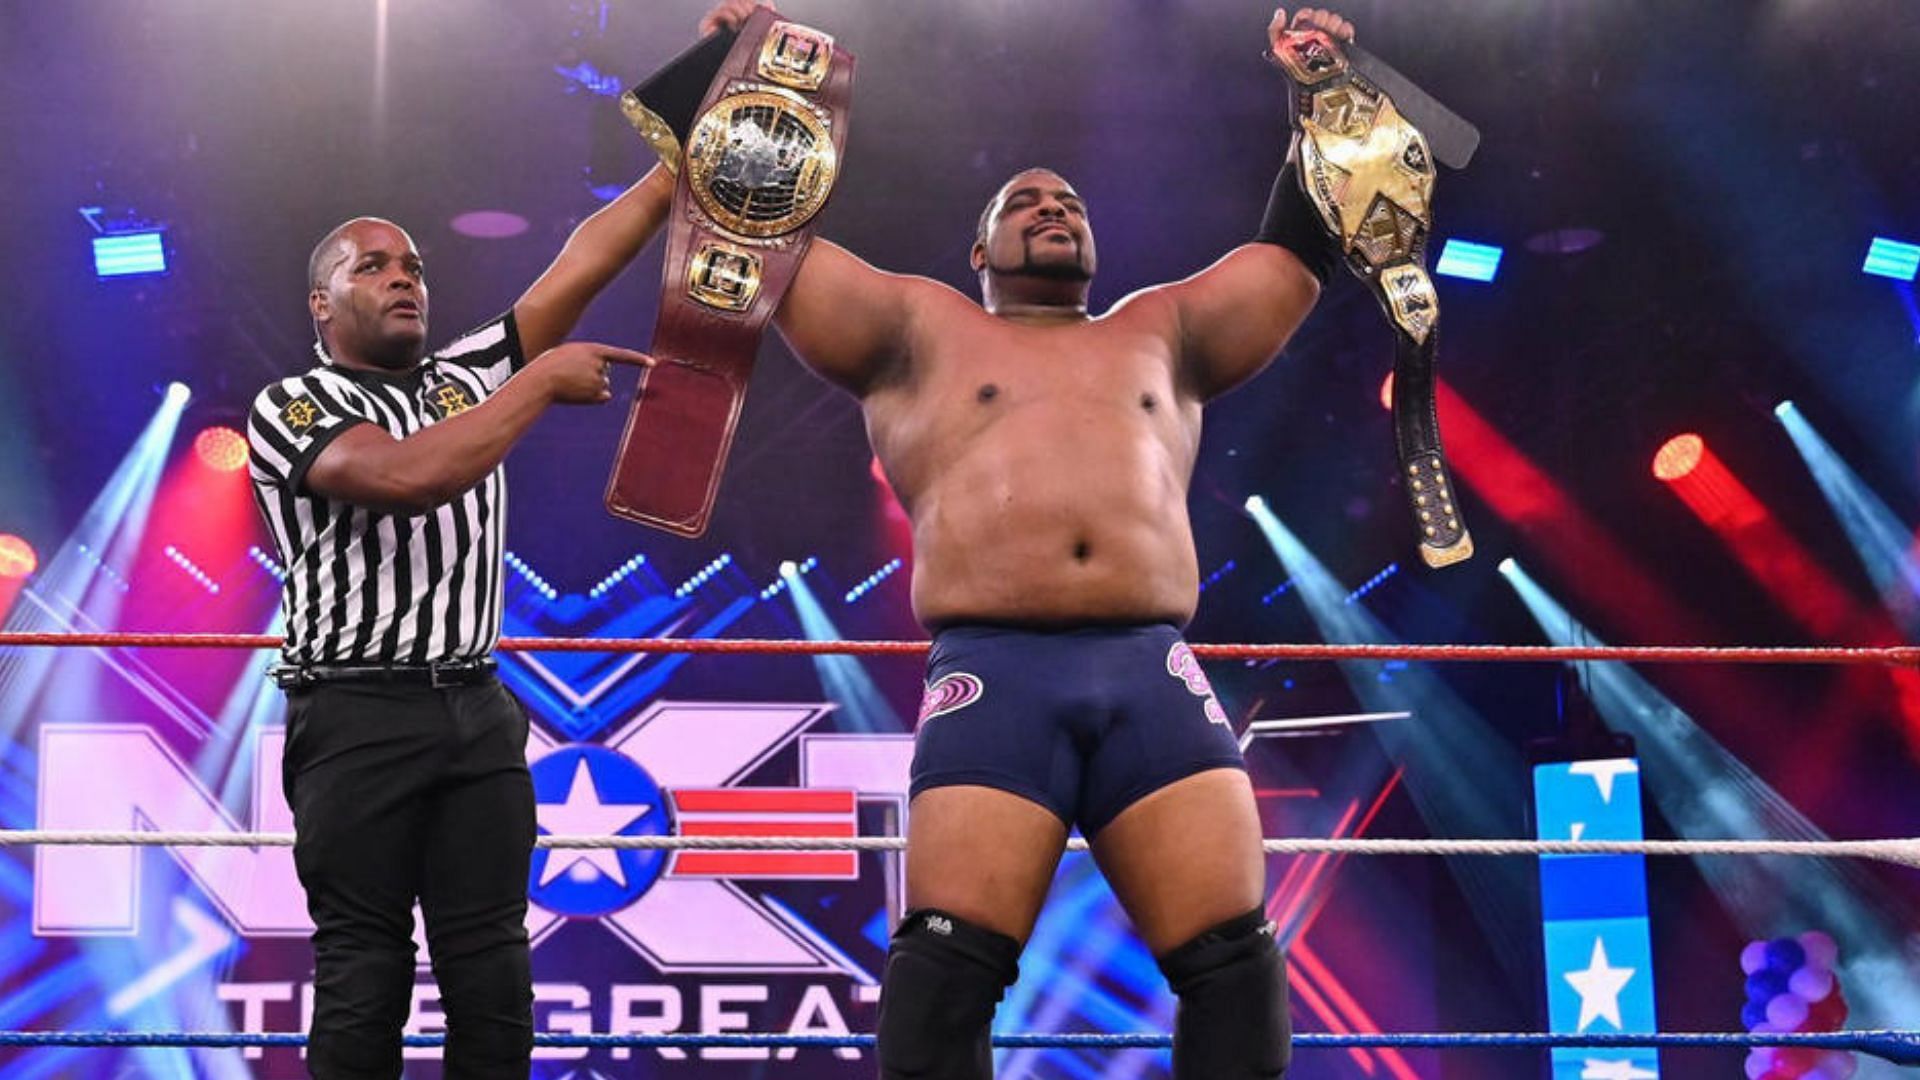 Keith Lee as the NXT and NXT North American Champion!